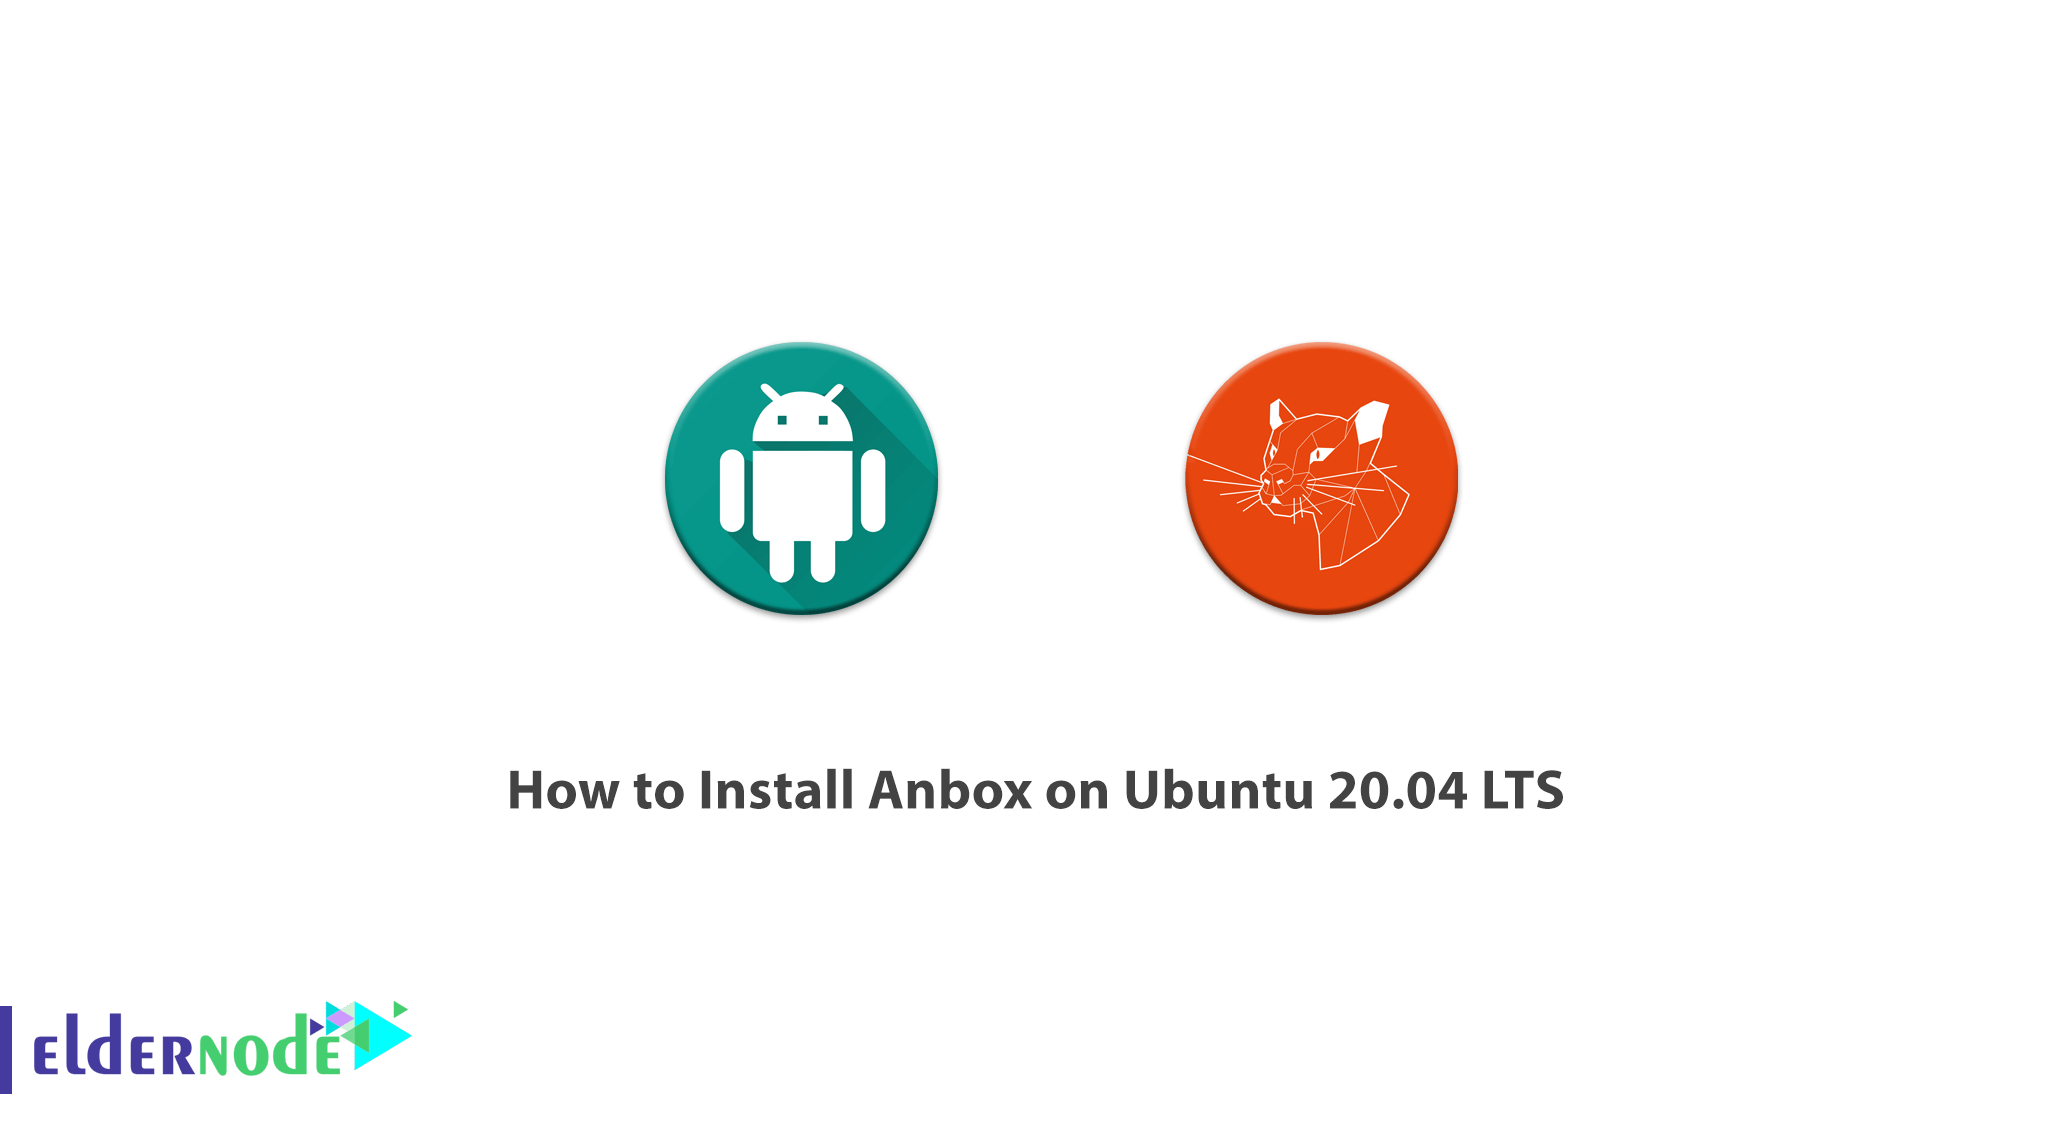 How to Install Anbox on Ubuntu 20.04 LTS